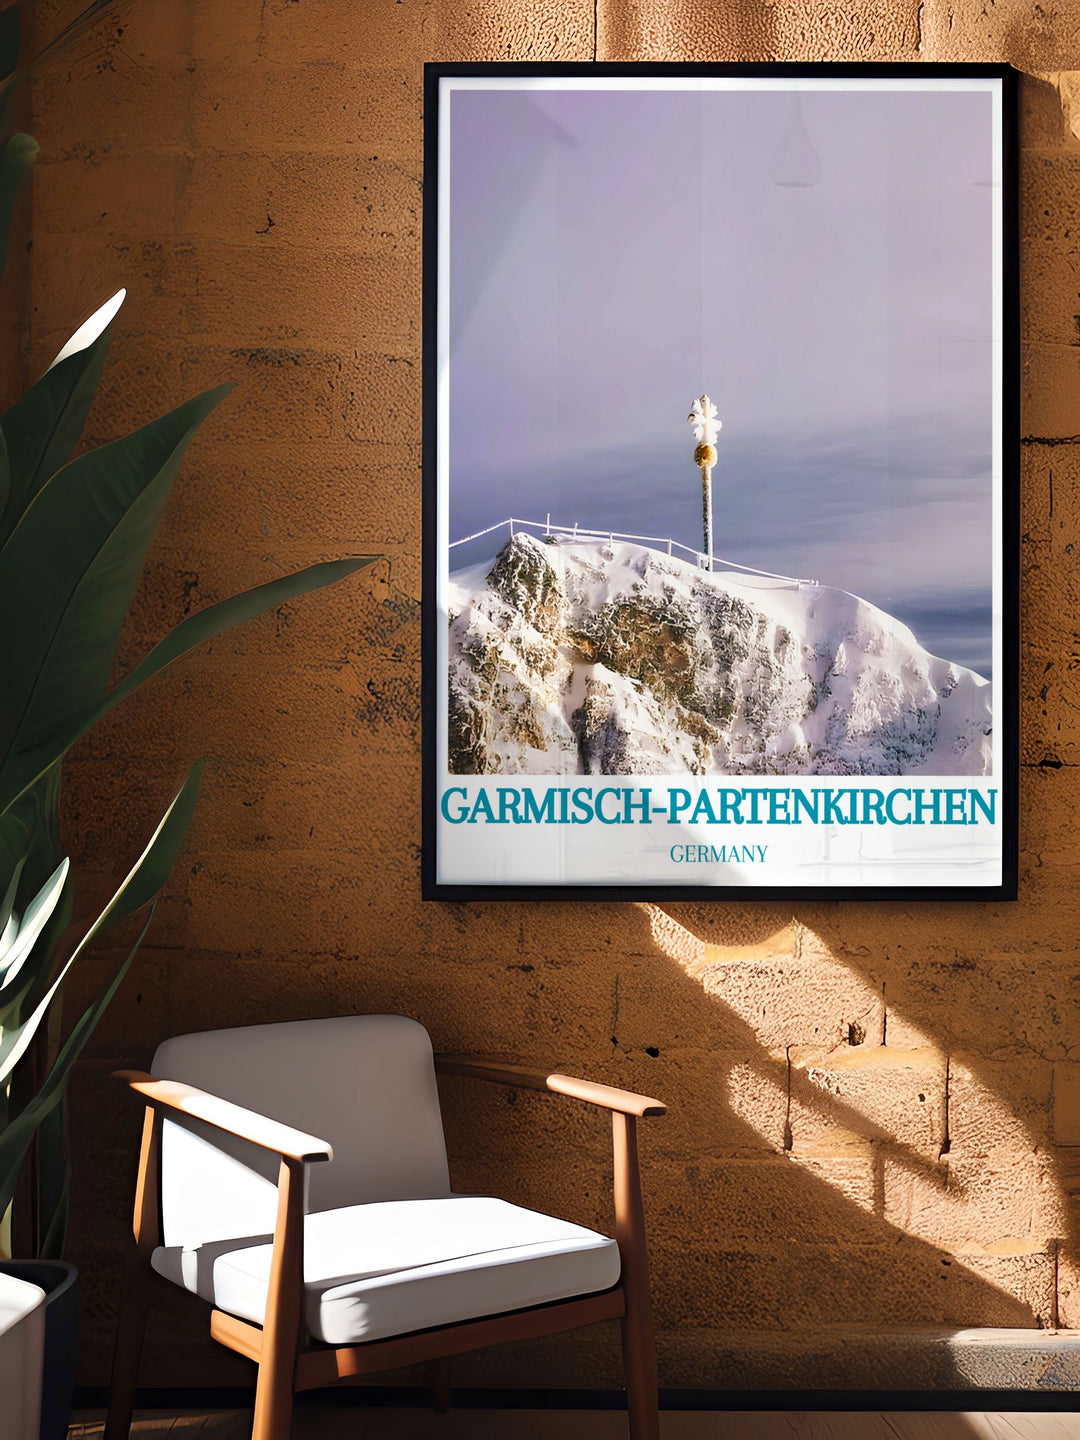 Gallery wall art featuring Garmisch Partenkirchen, showcasing the towns rich history, beautiful Bavarian architecture, and cultural vibrancy, perfect for adding a touch of historical charm and scenic beauty to any home decor.